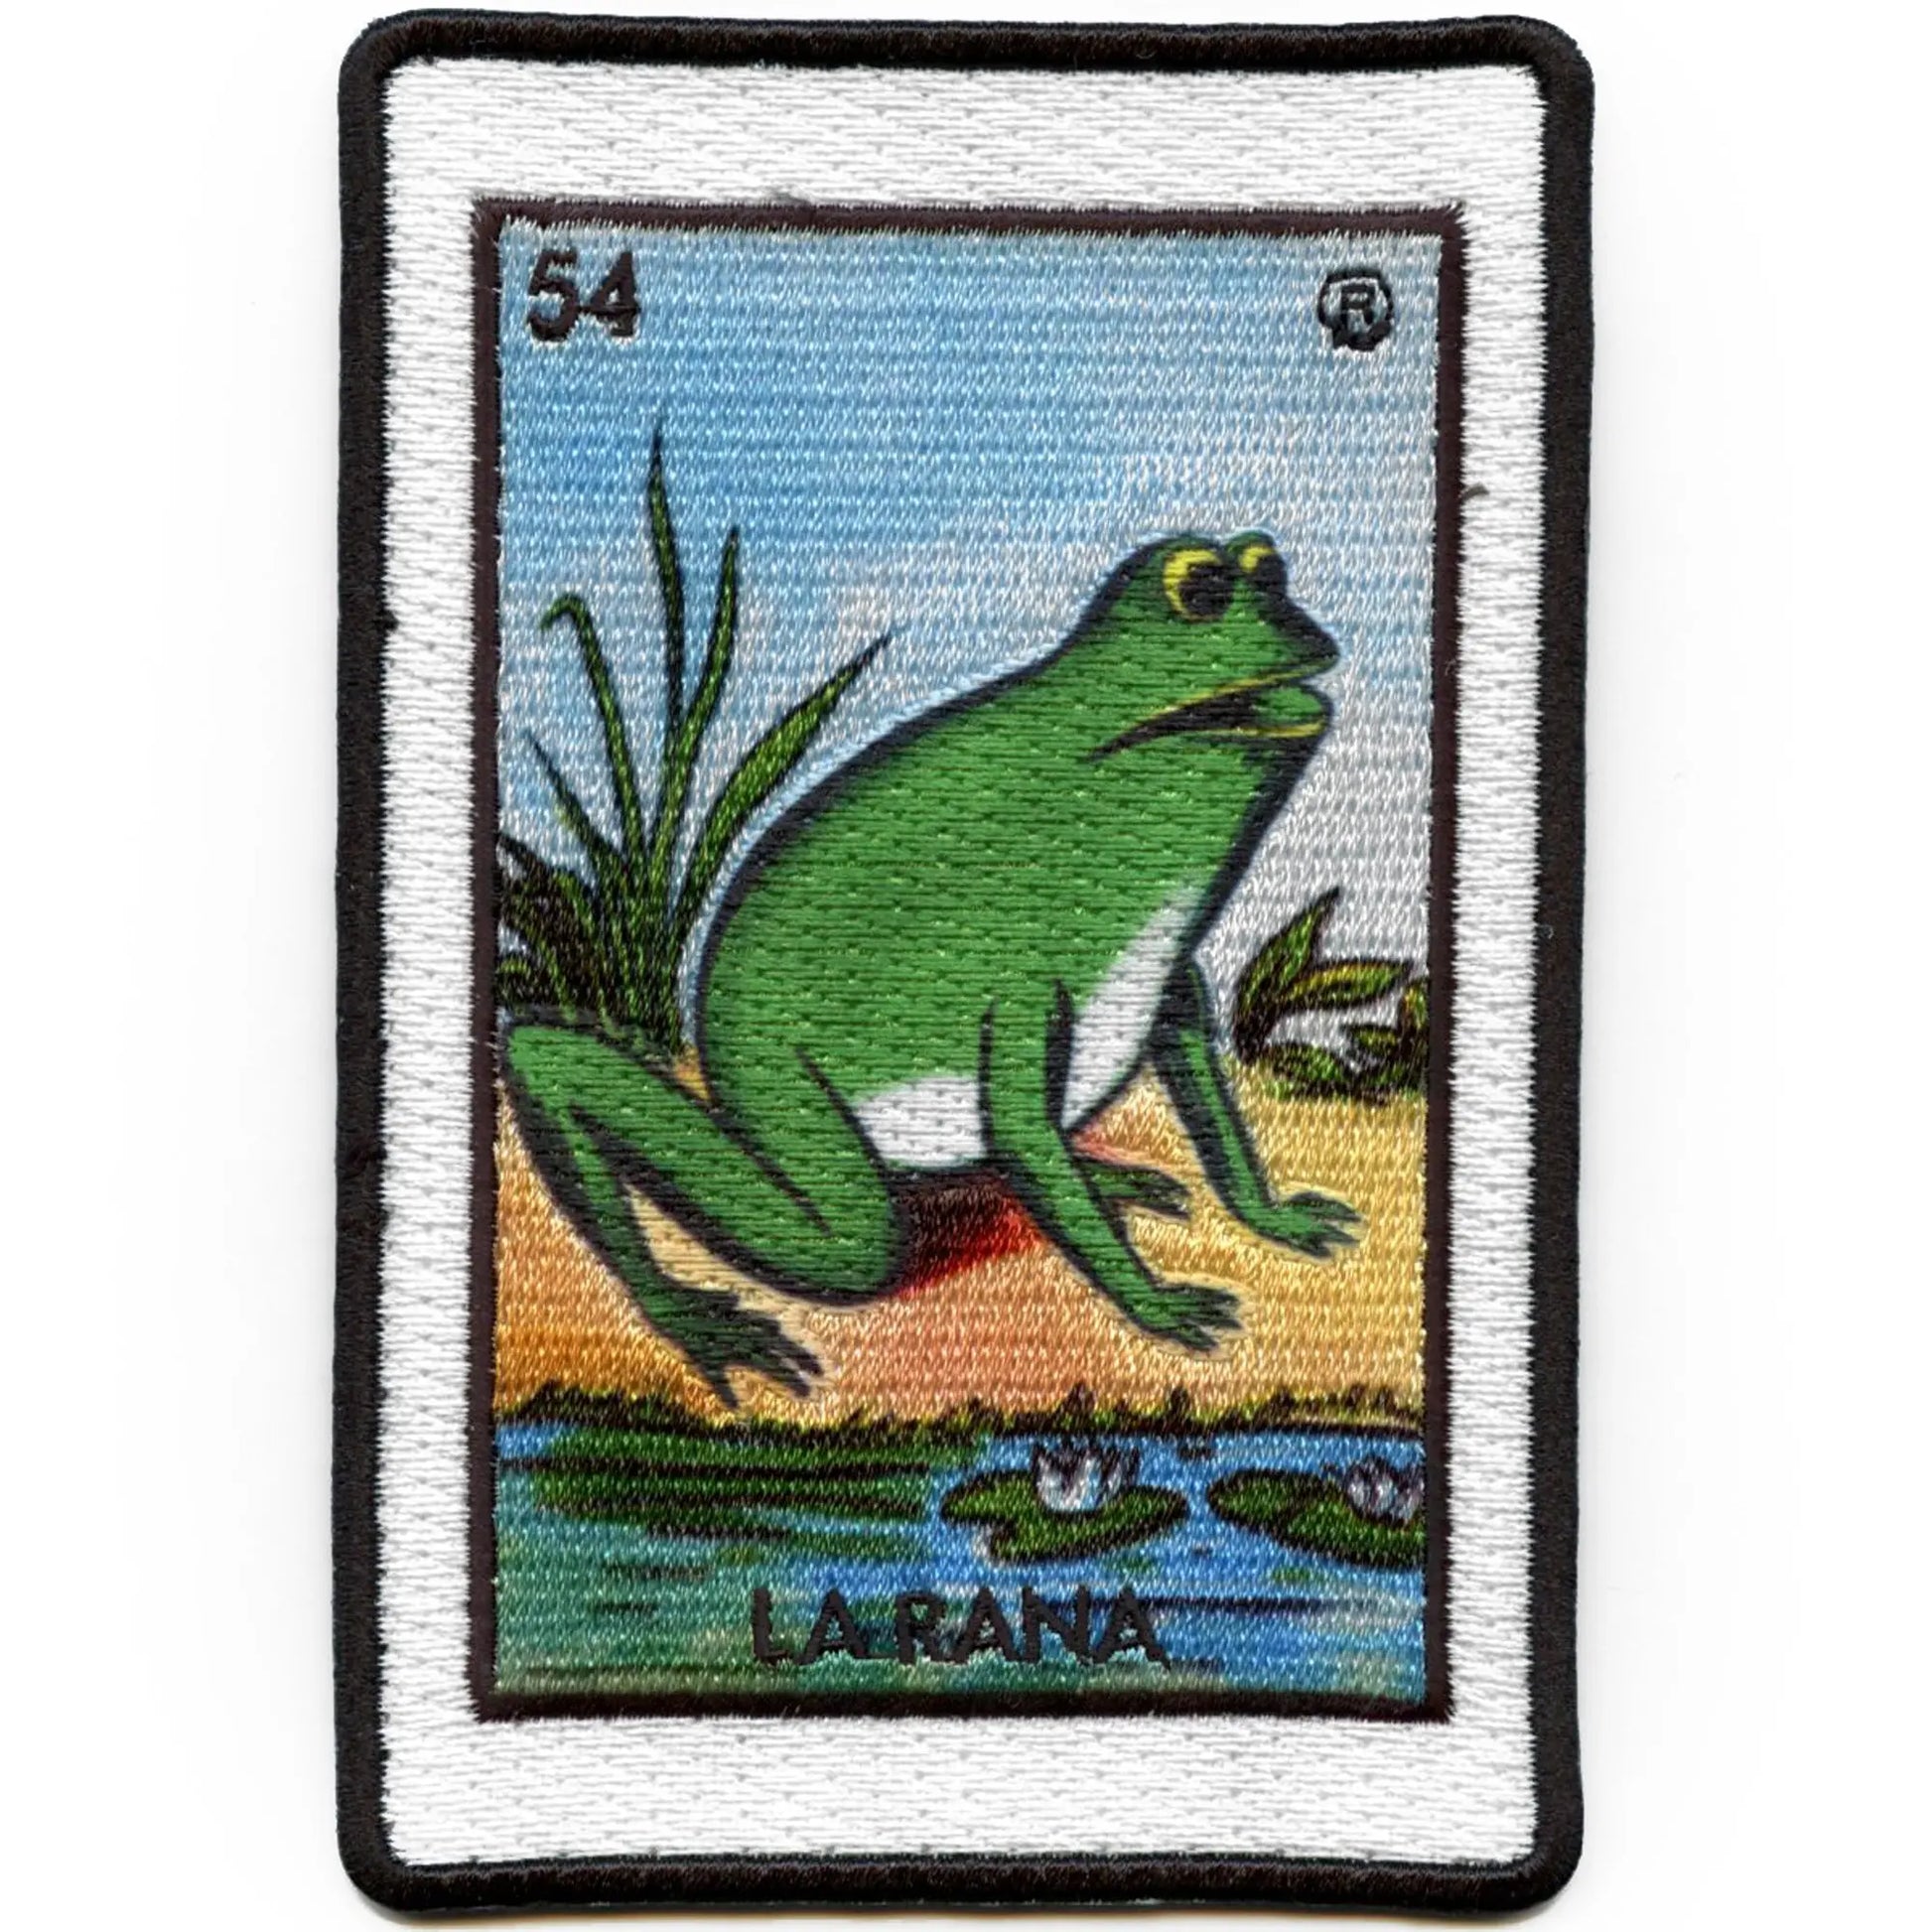 La Rana 54 Patch Mexican Loteria Card Sublimated Embroidery Iron On